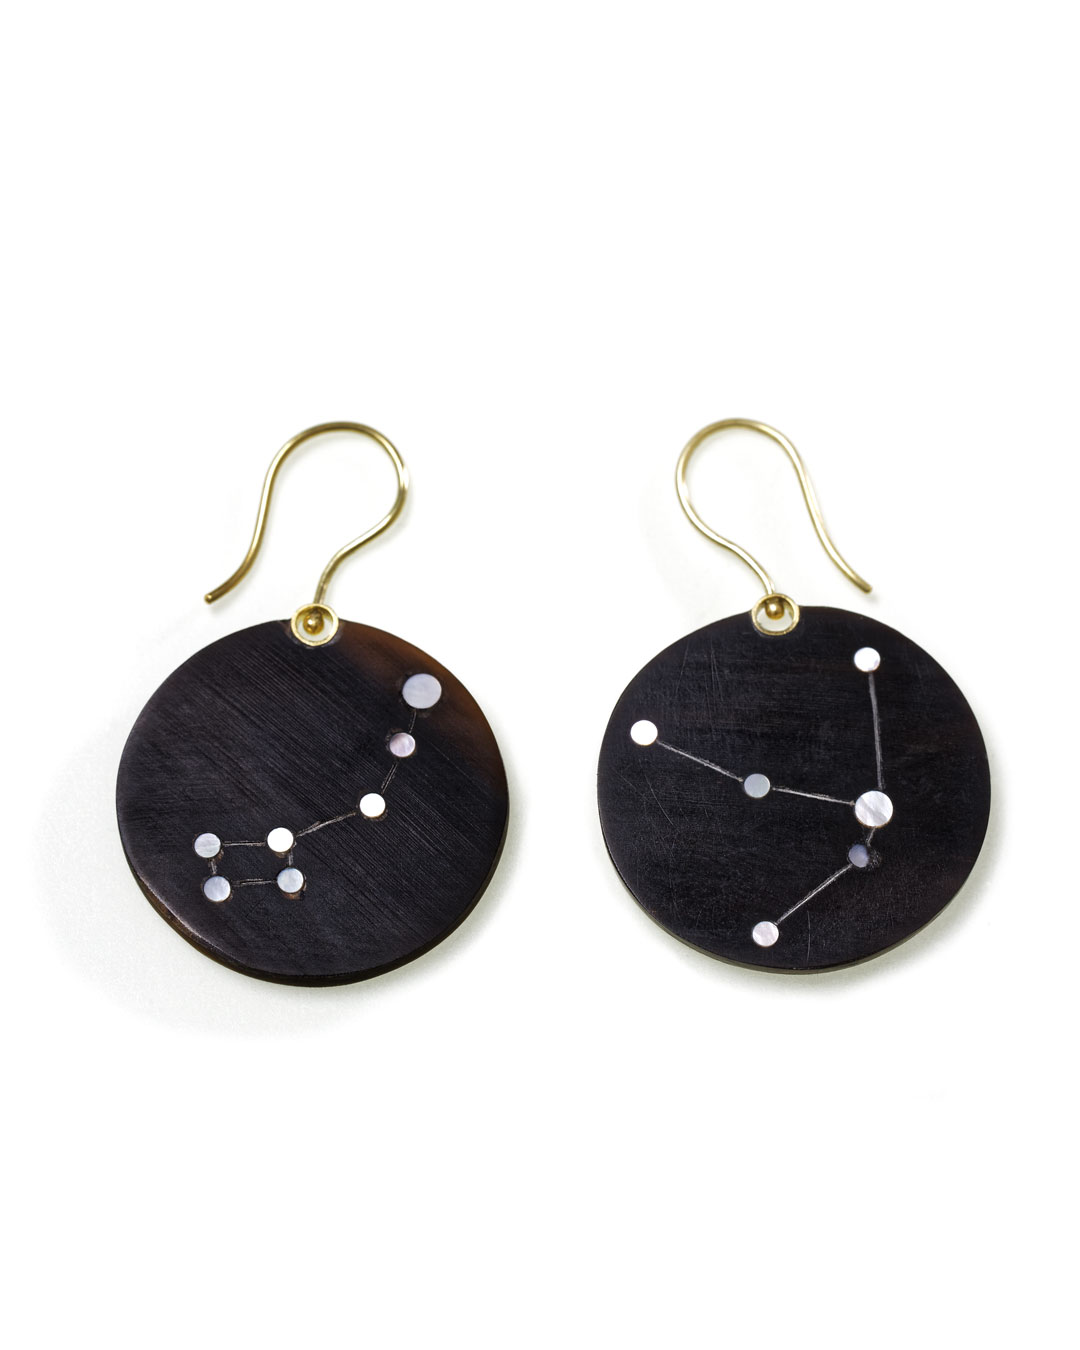 Julie Mollenhauer, untitled, 2015, earrings; buffalo horn, mother-of-pearl, 14ct gold, 50 x 31 x 2 mm, €1010